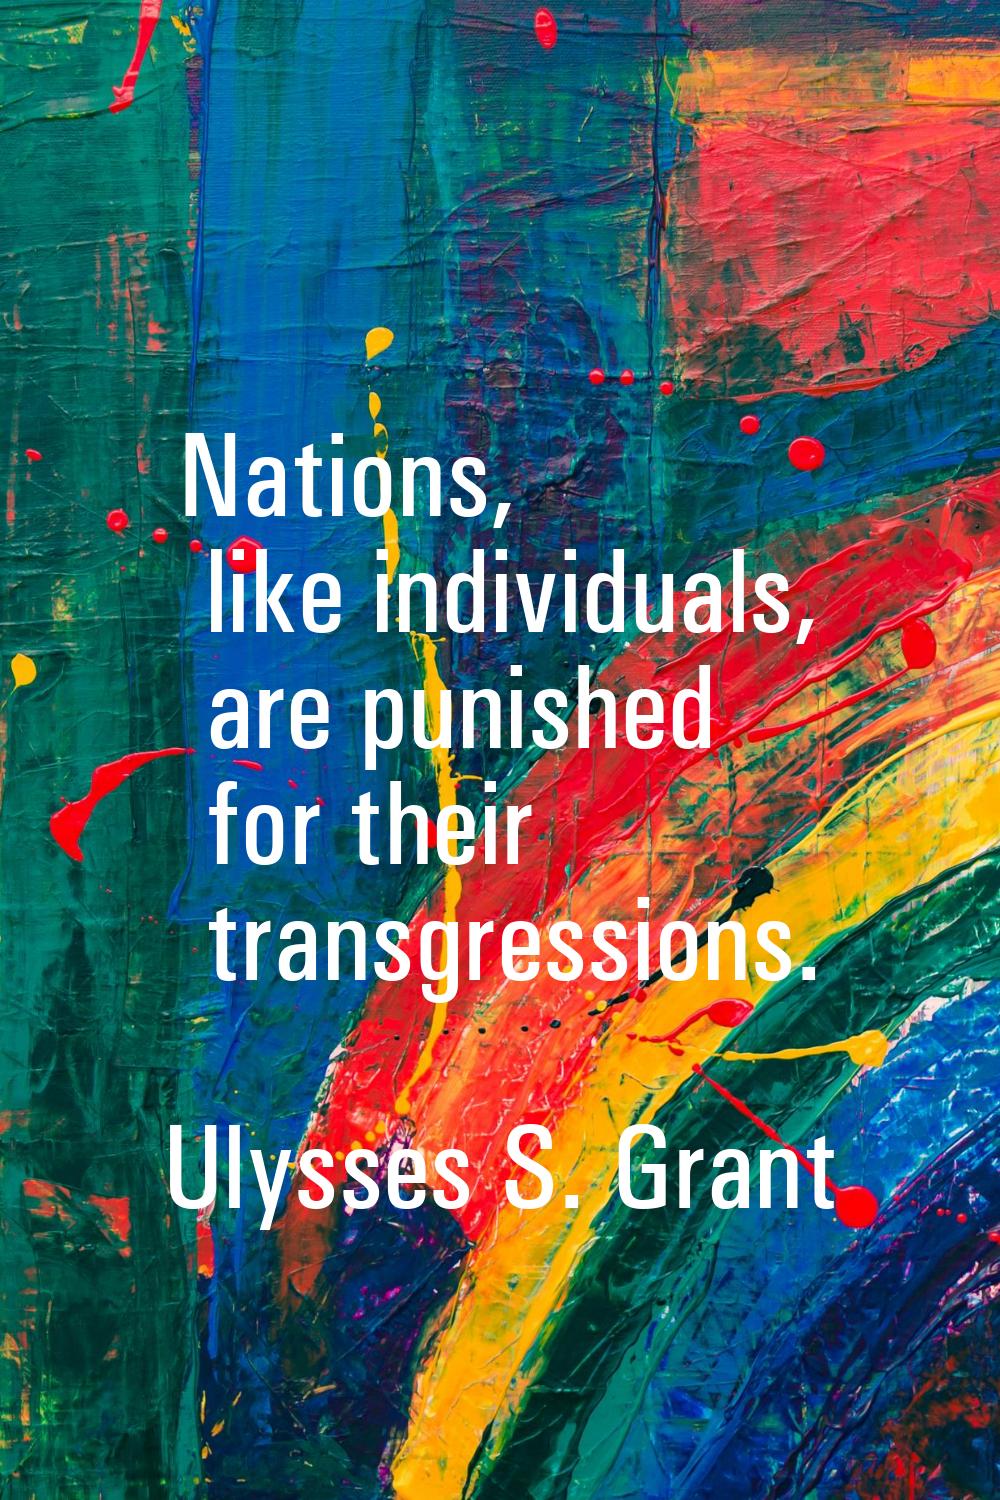 Nations, like individuals, are punished for their transgressions.